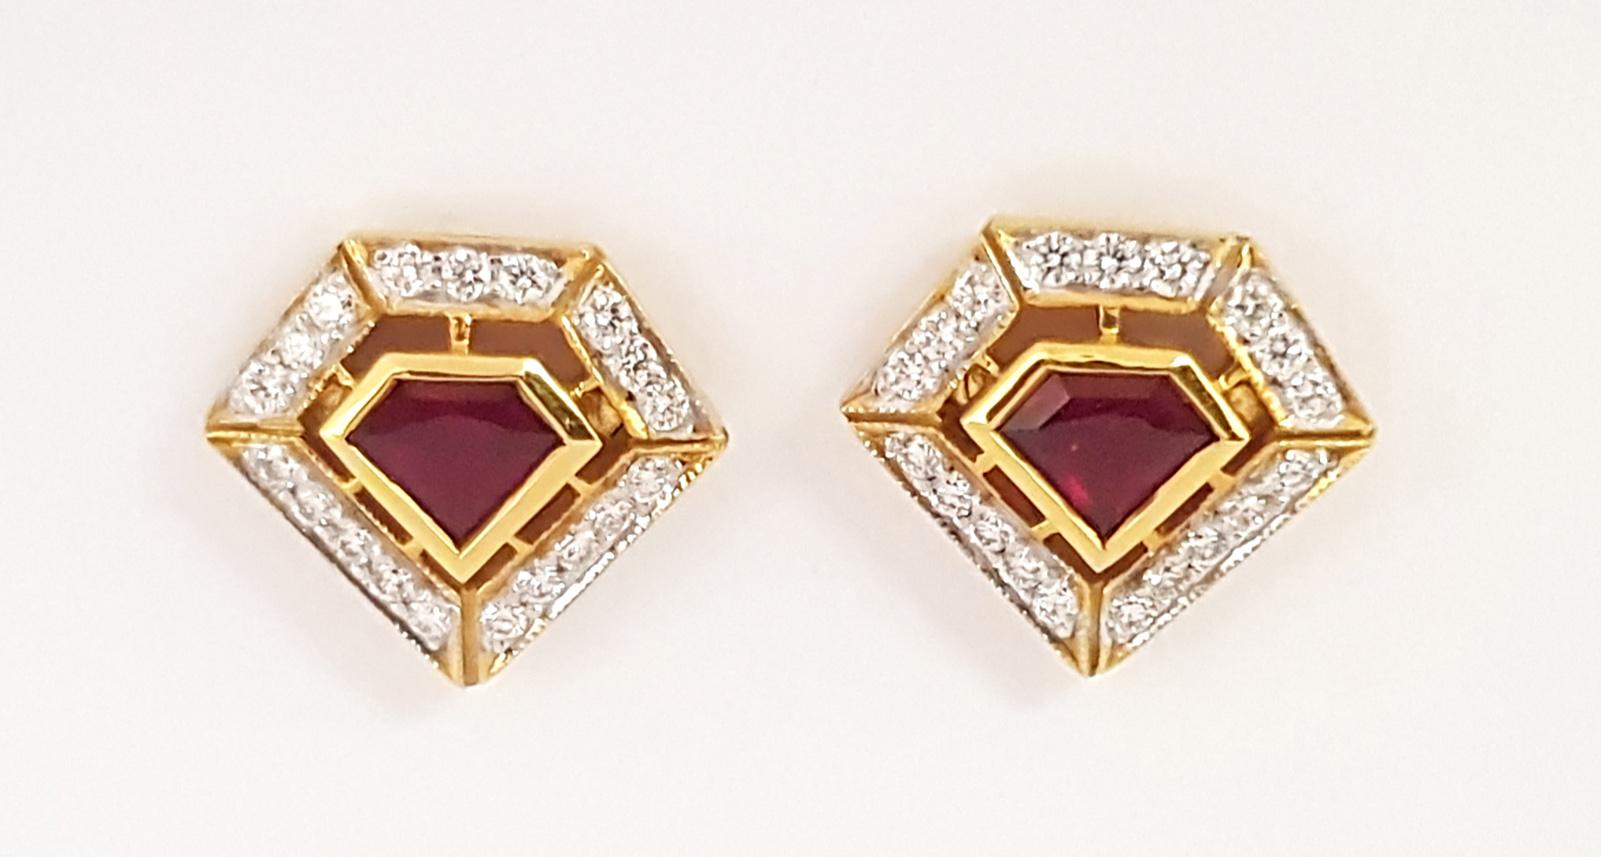 Ruby 0.72 carat with Diamond 0.24 carat Earrings set in 18K Gold Settings

Width: 1.2 cm
Length: 1.1 cm
Weight: 4.80 grams

Uncompromisingly modern and exuding, the collection draws inspirations from works during the Cubism movement to the Abstract